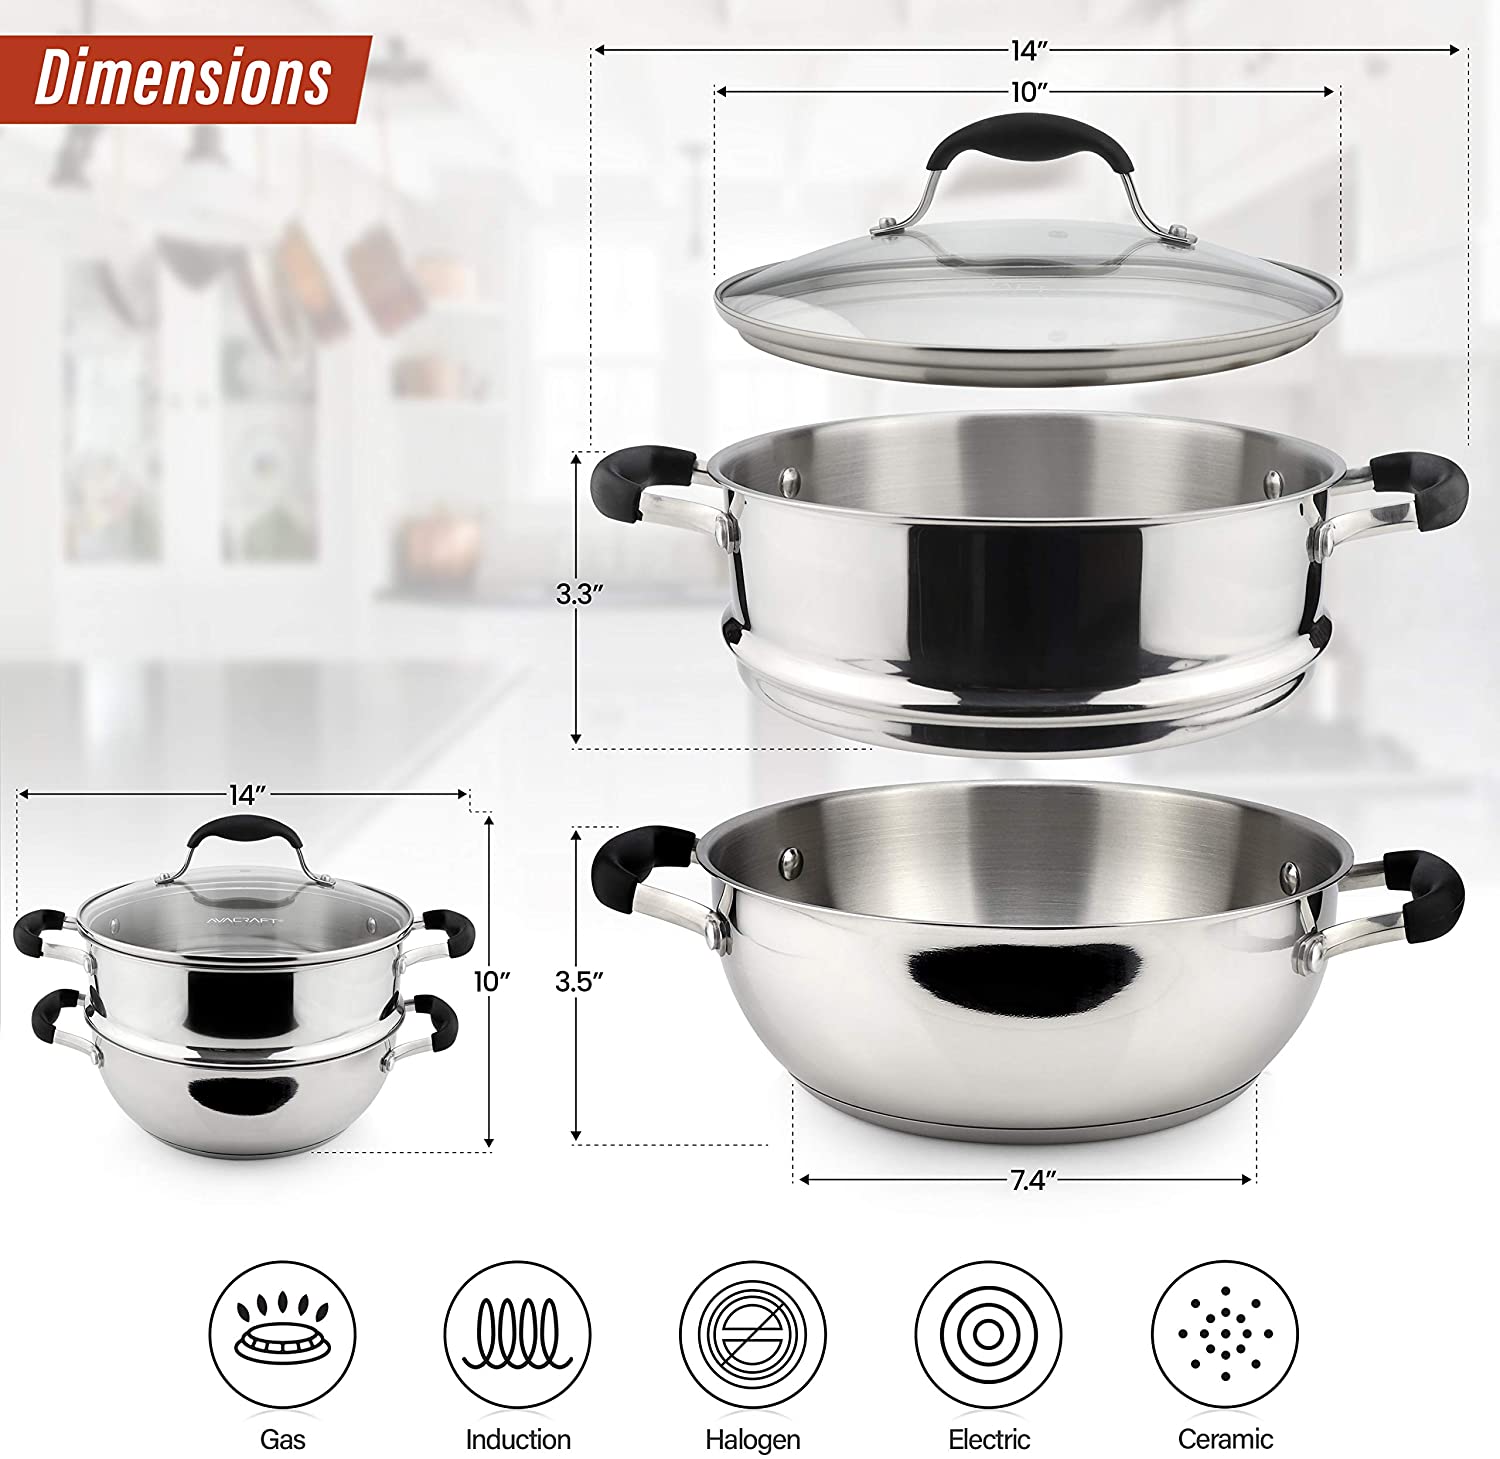 AVACRAFT 18/10, 3 Piece Stainless Steel Steamer Cooking Pot Set, Steamer for Cooking, Everyday Pan, Steamer Pan Set, with Glass Lid, Induction Cooktop